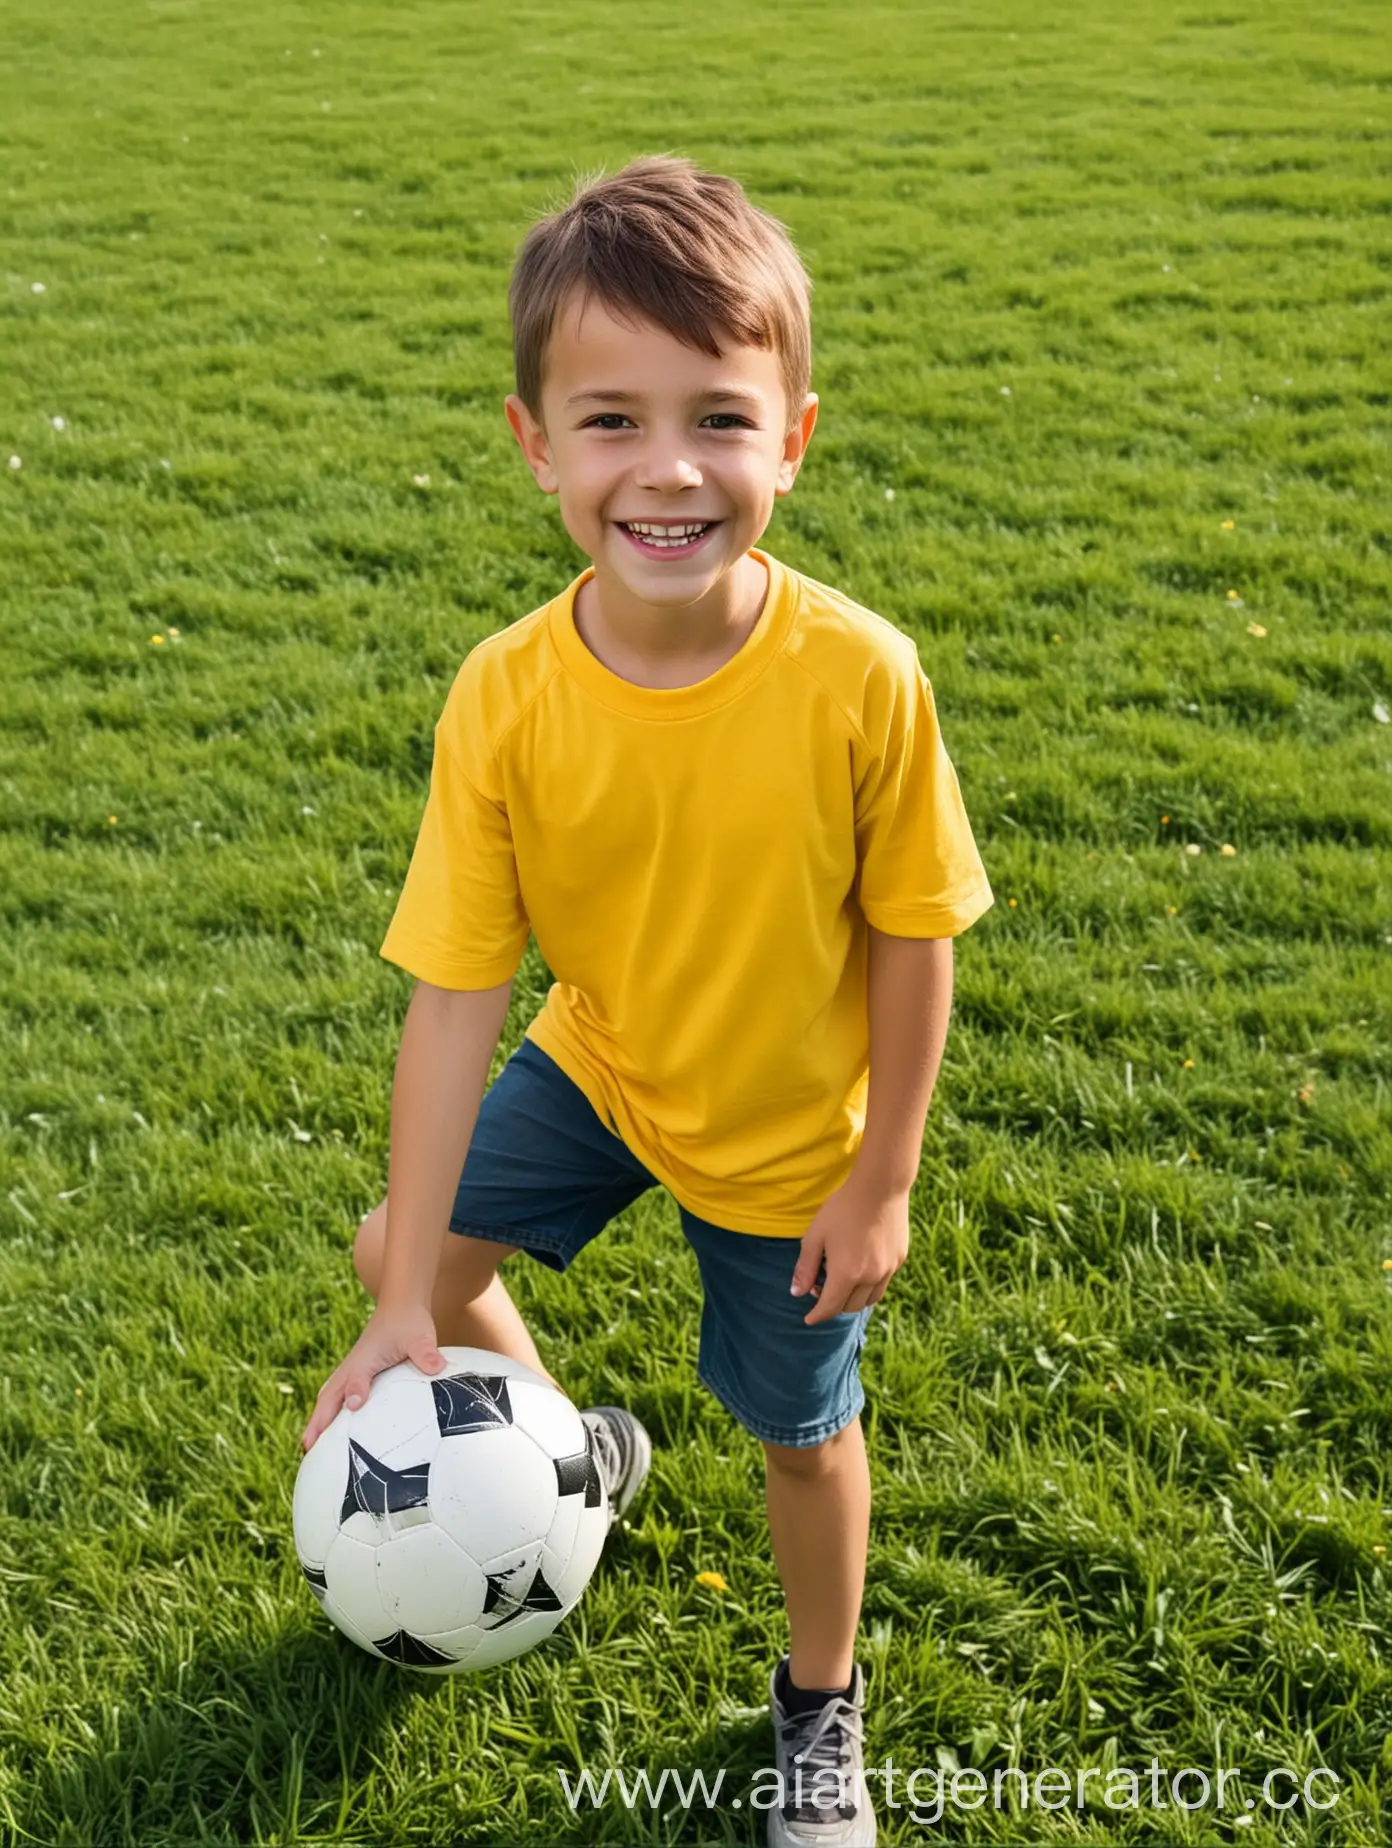 a boy with a soccer ball on the glade is smiling summer in a yellow t-shirt